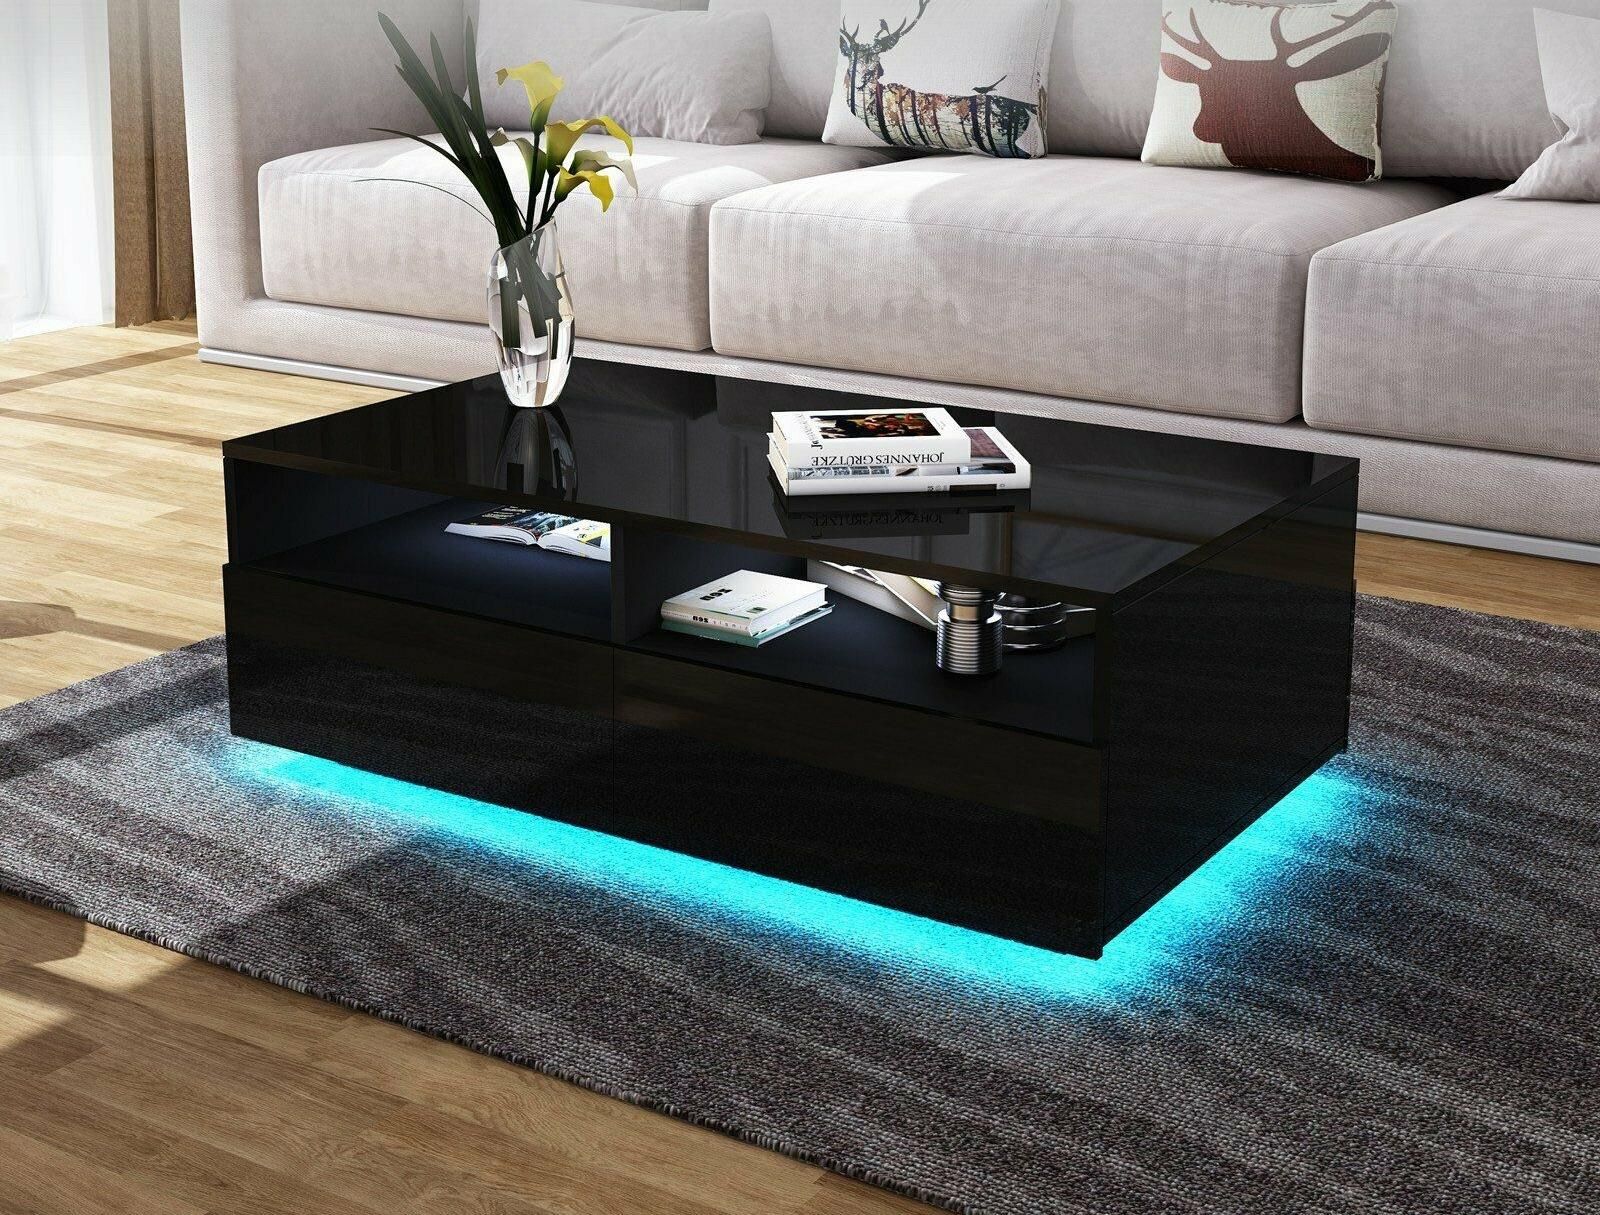 Living Room Rectangle Coffee Table 4 Drawers Rgb 16 Color Led Lights | Ebay Throughout Coffee Tables With Drawers And Led Lights (View 7 of 20)